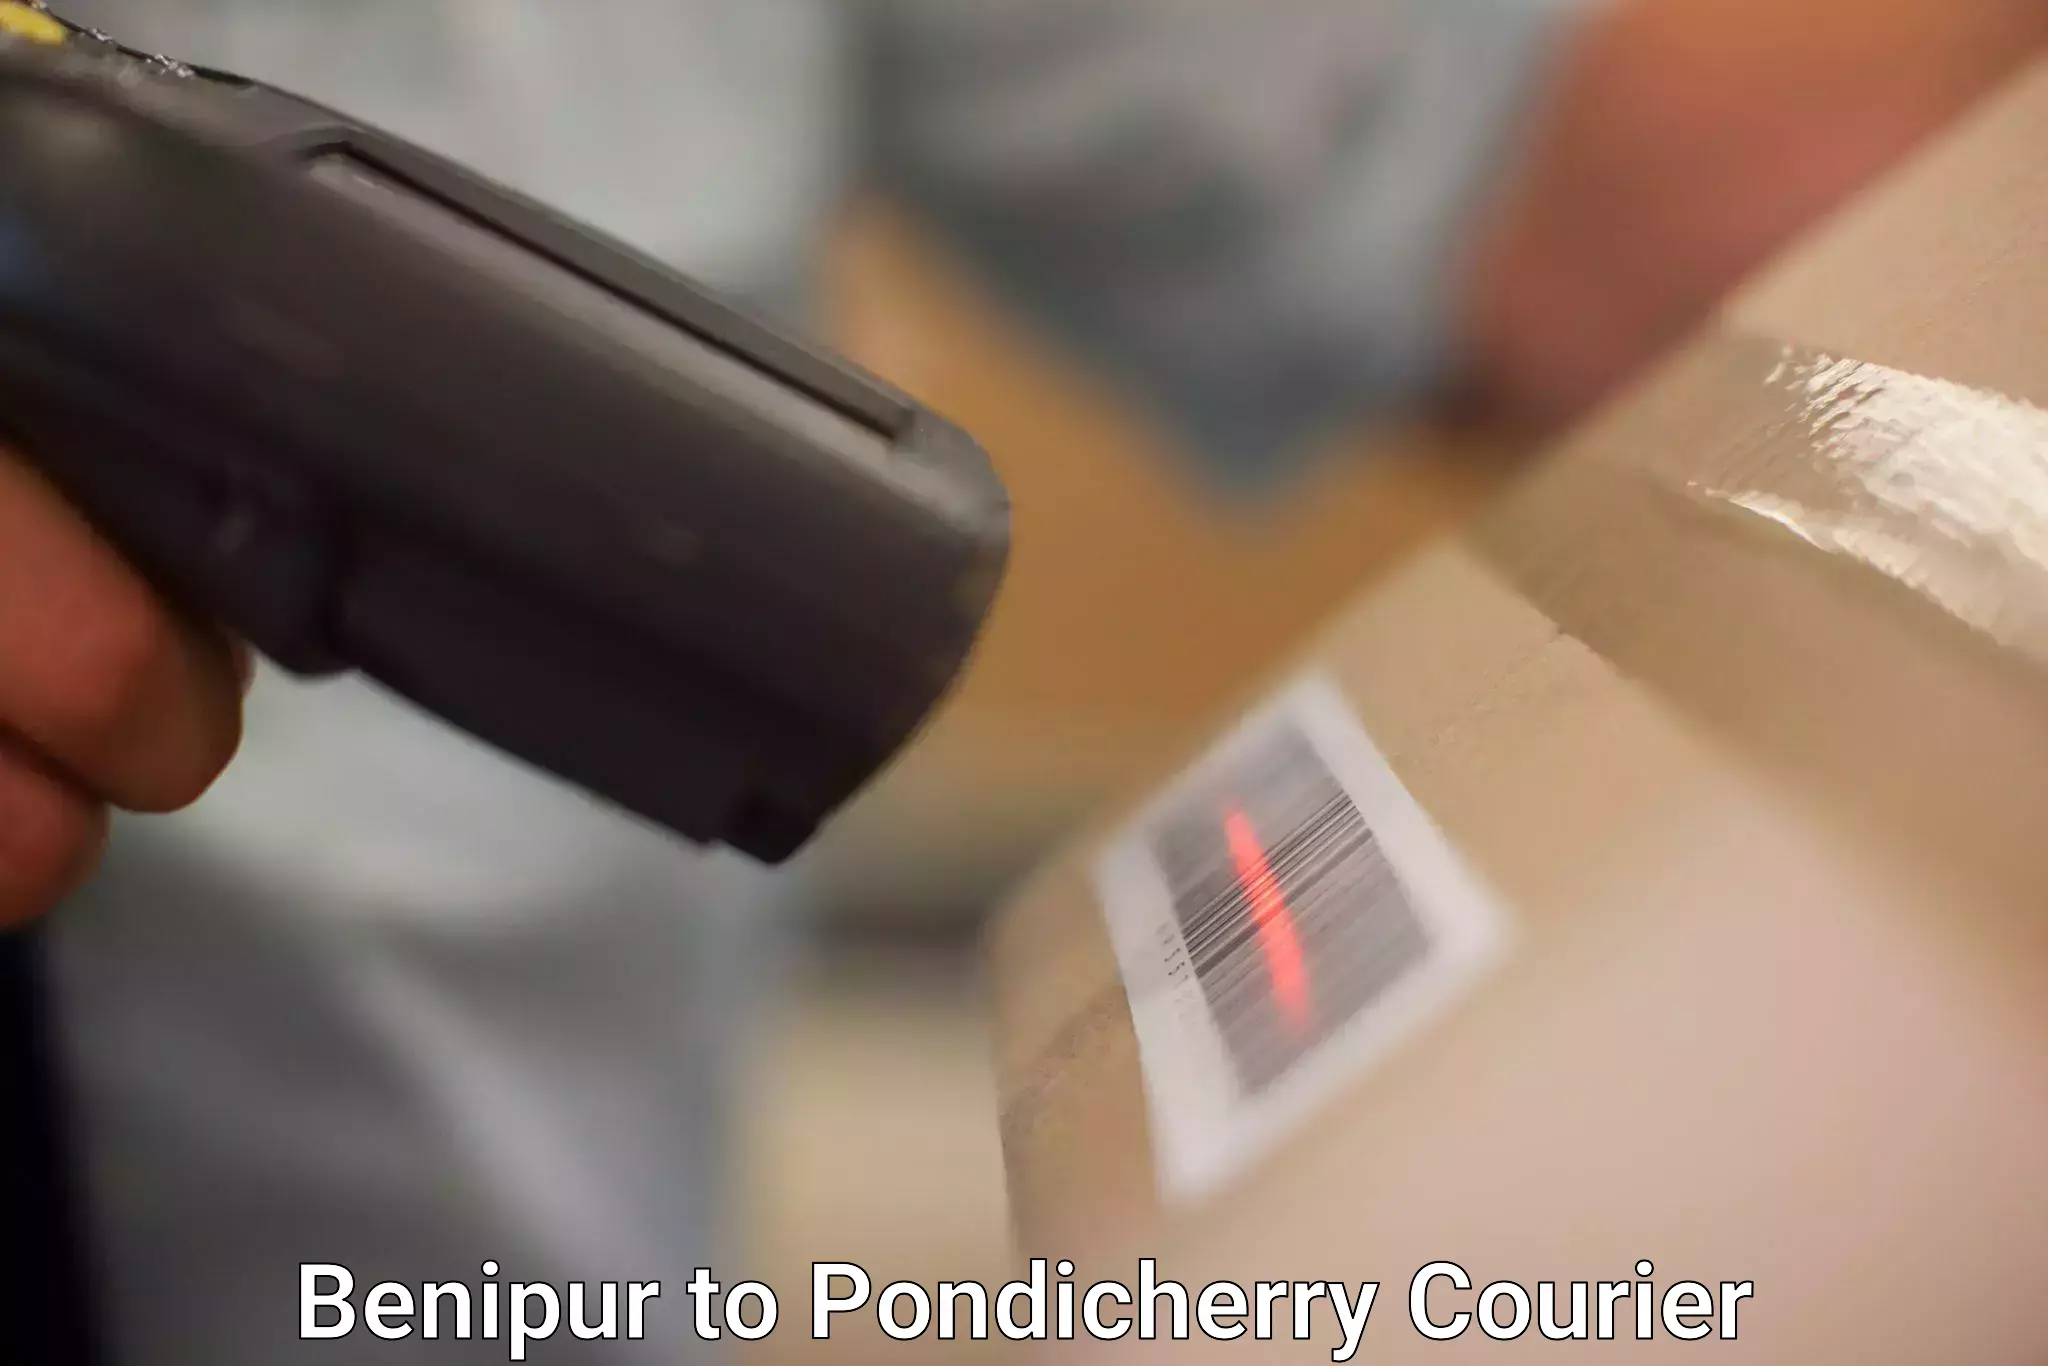 Easy access courier services Benipur to Pondicherry